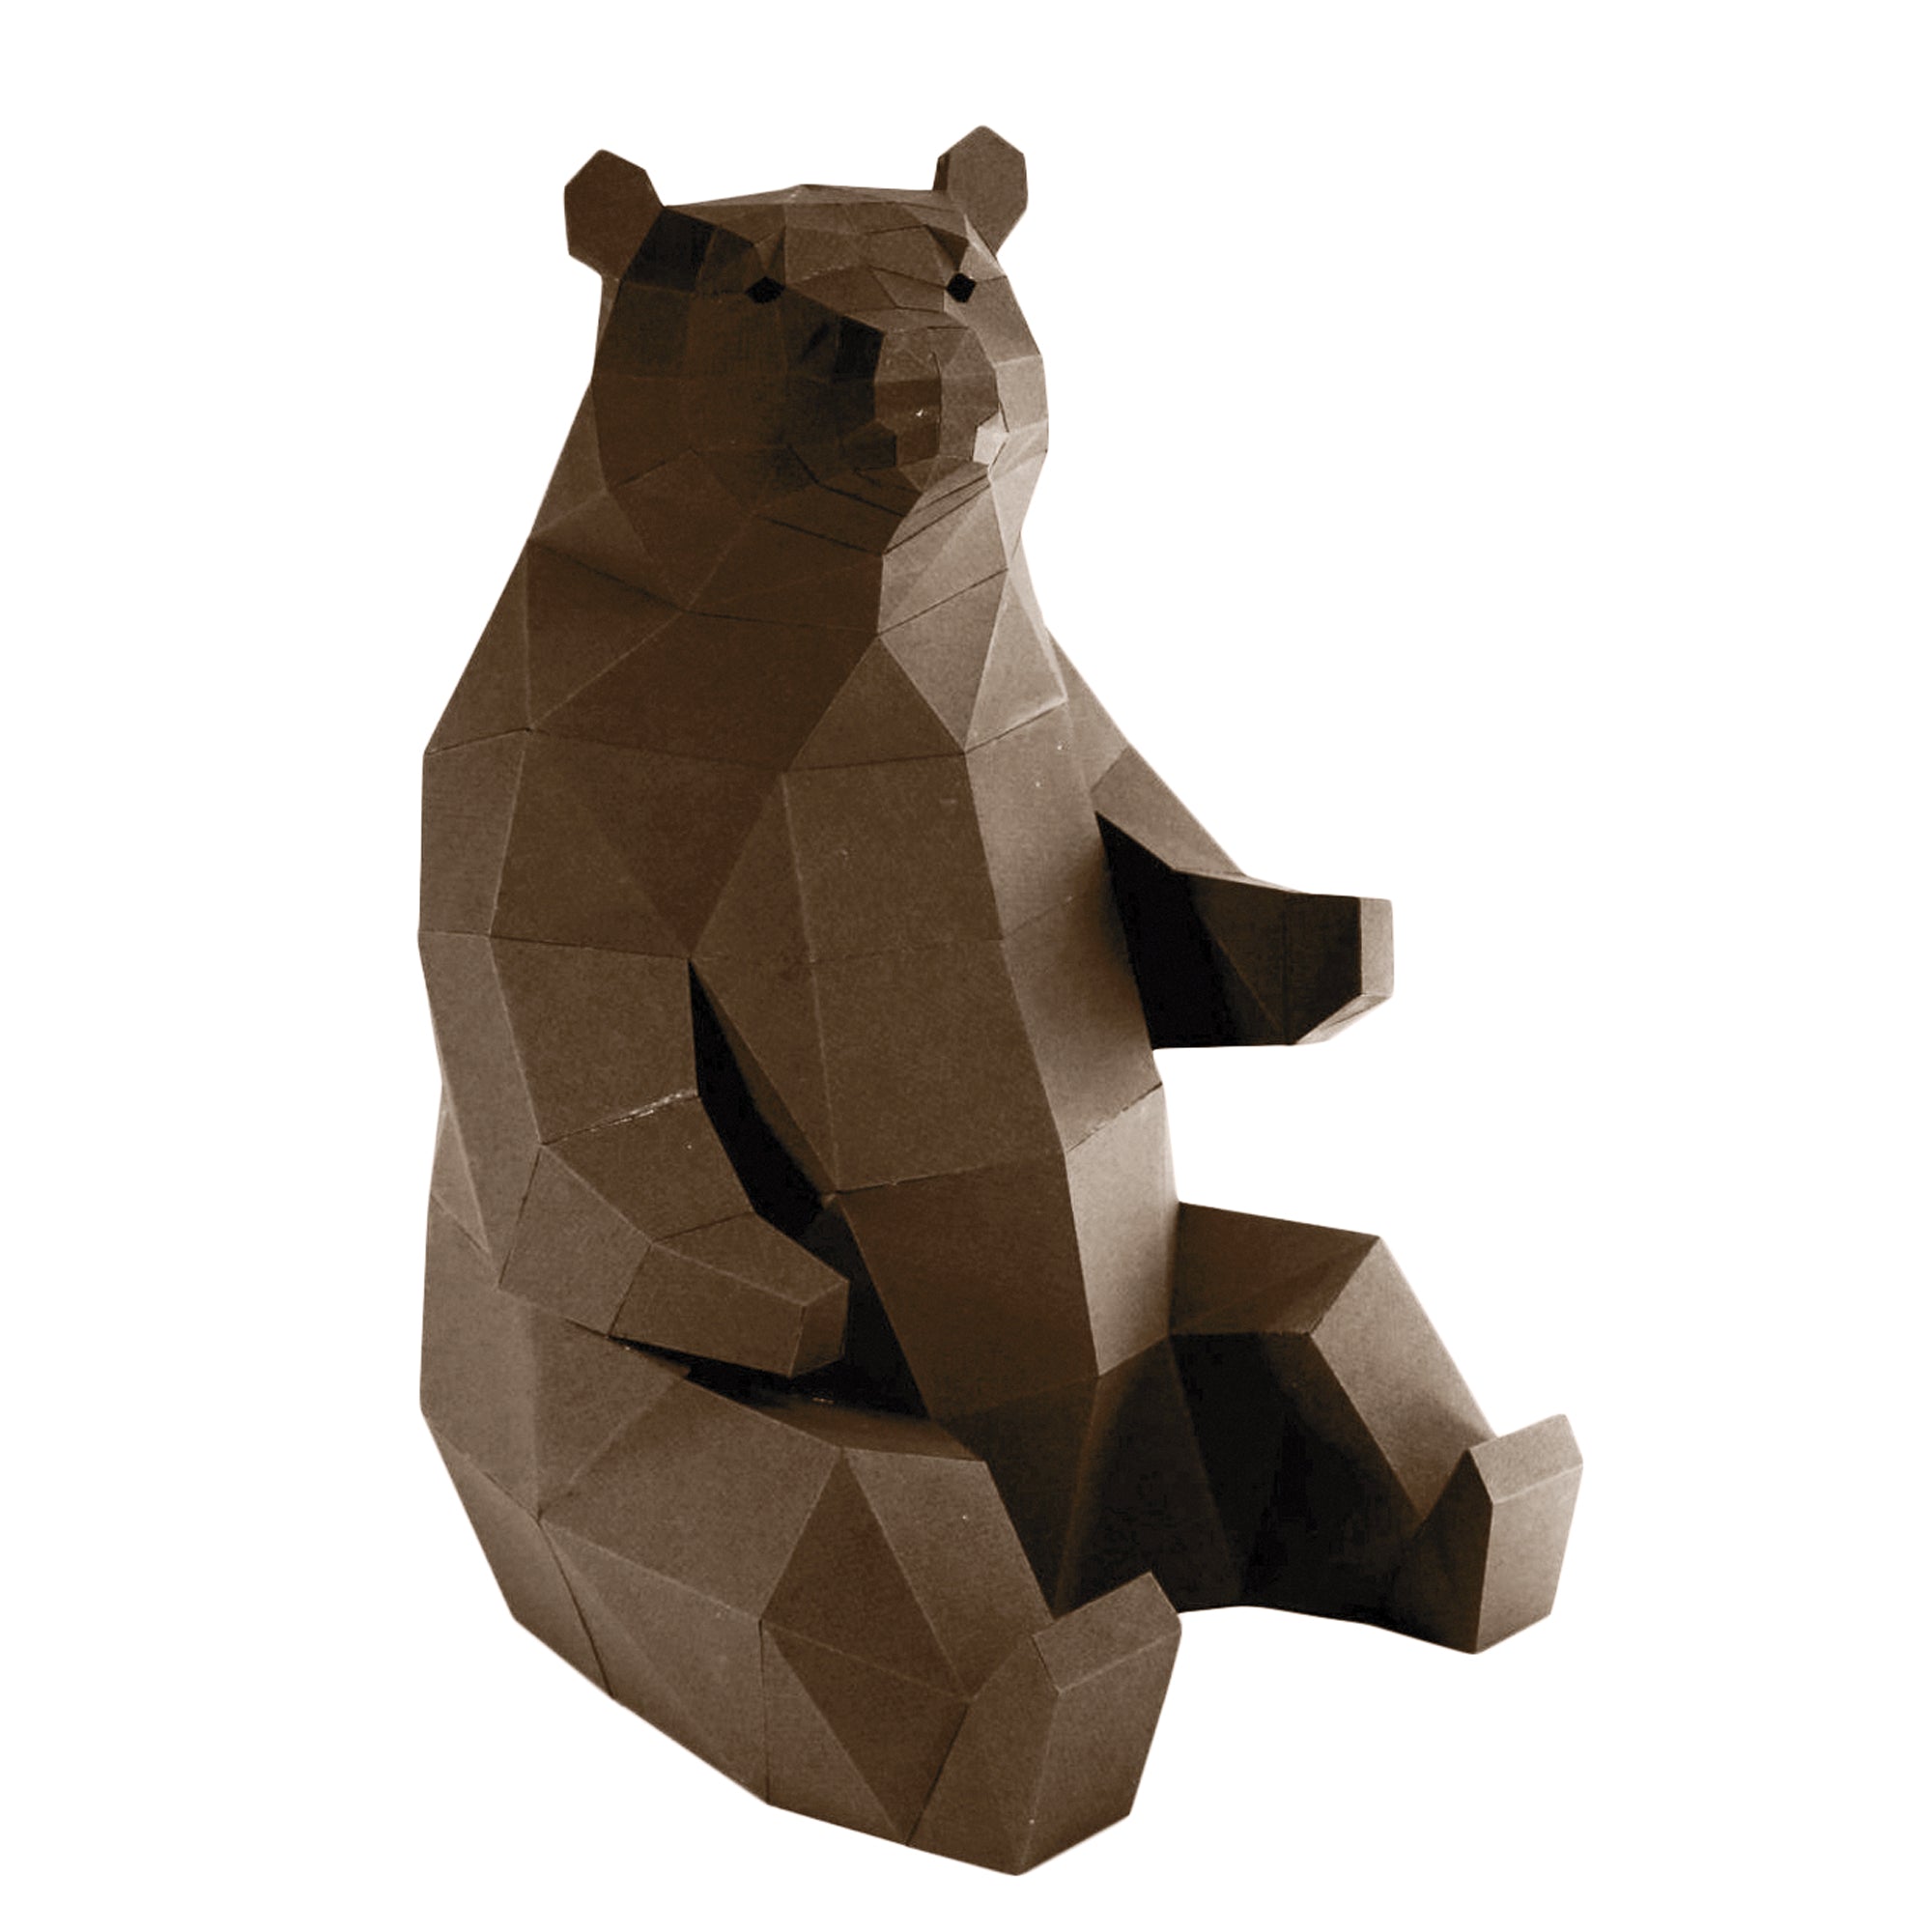 Dark brown Geometrical-shaped Papercraft bear that is folded and cut paper pieces glued together with a white background.